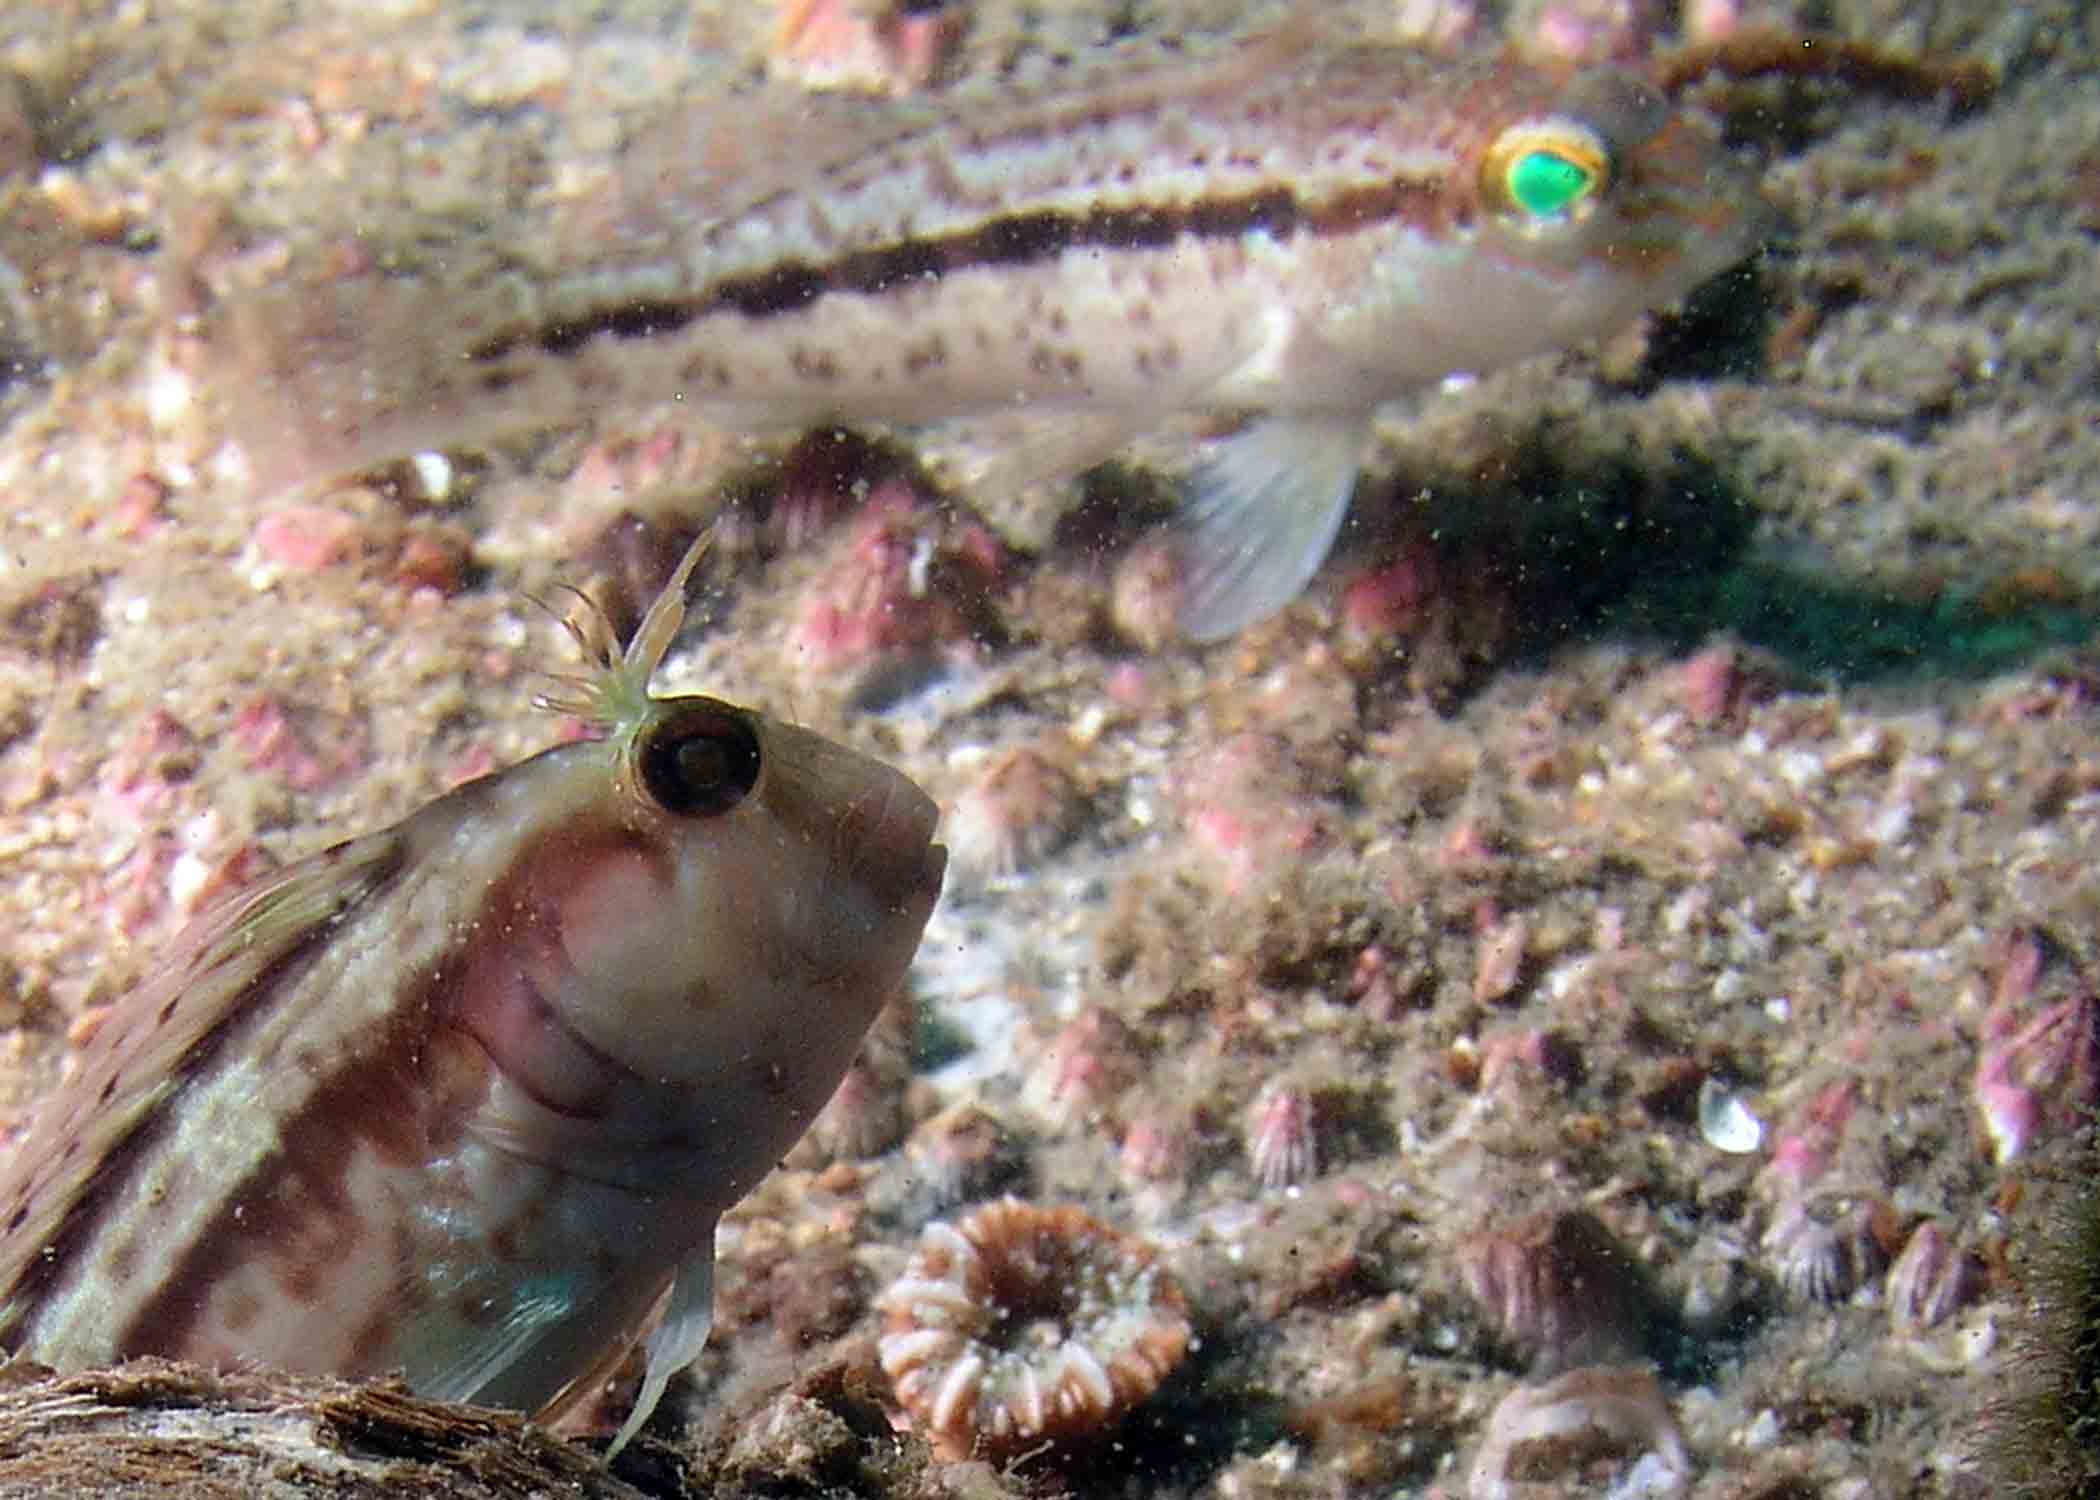 Blenny and Sea Bass